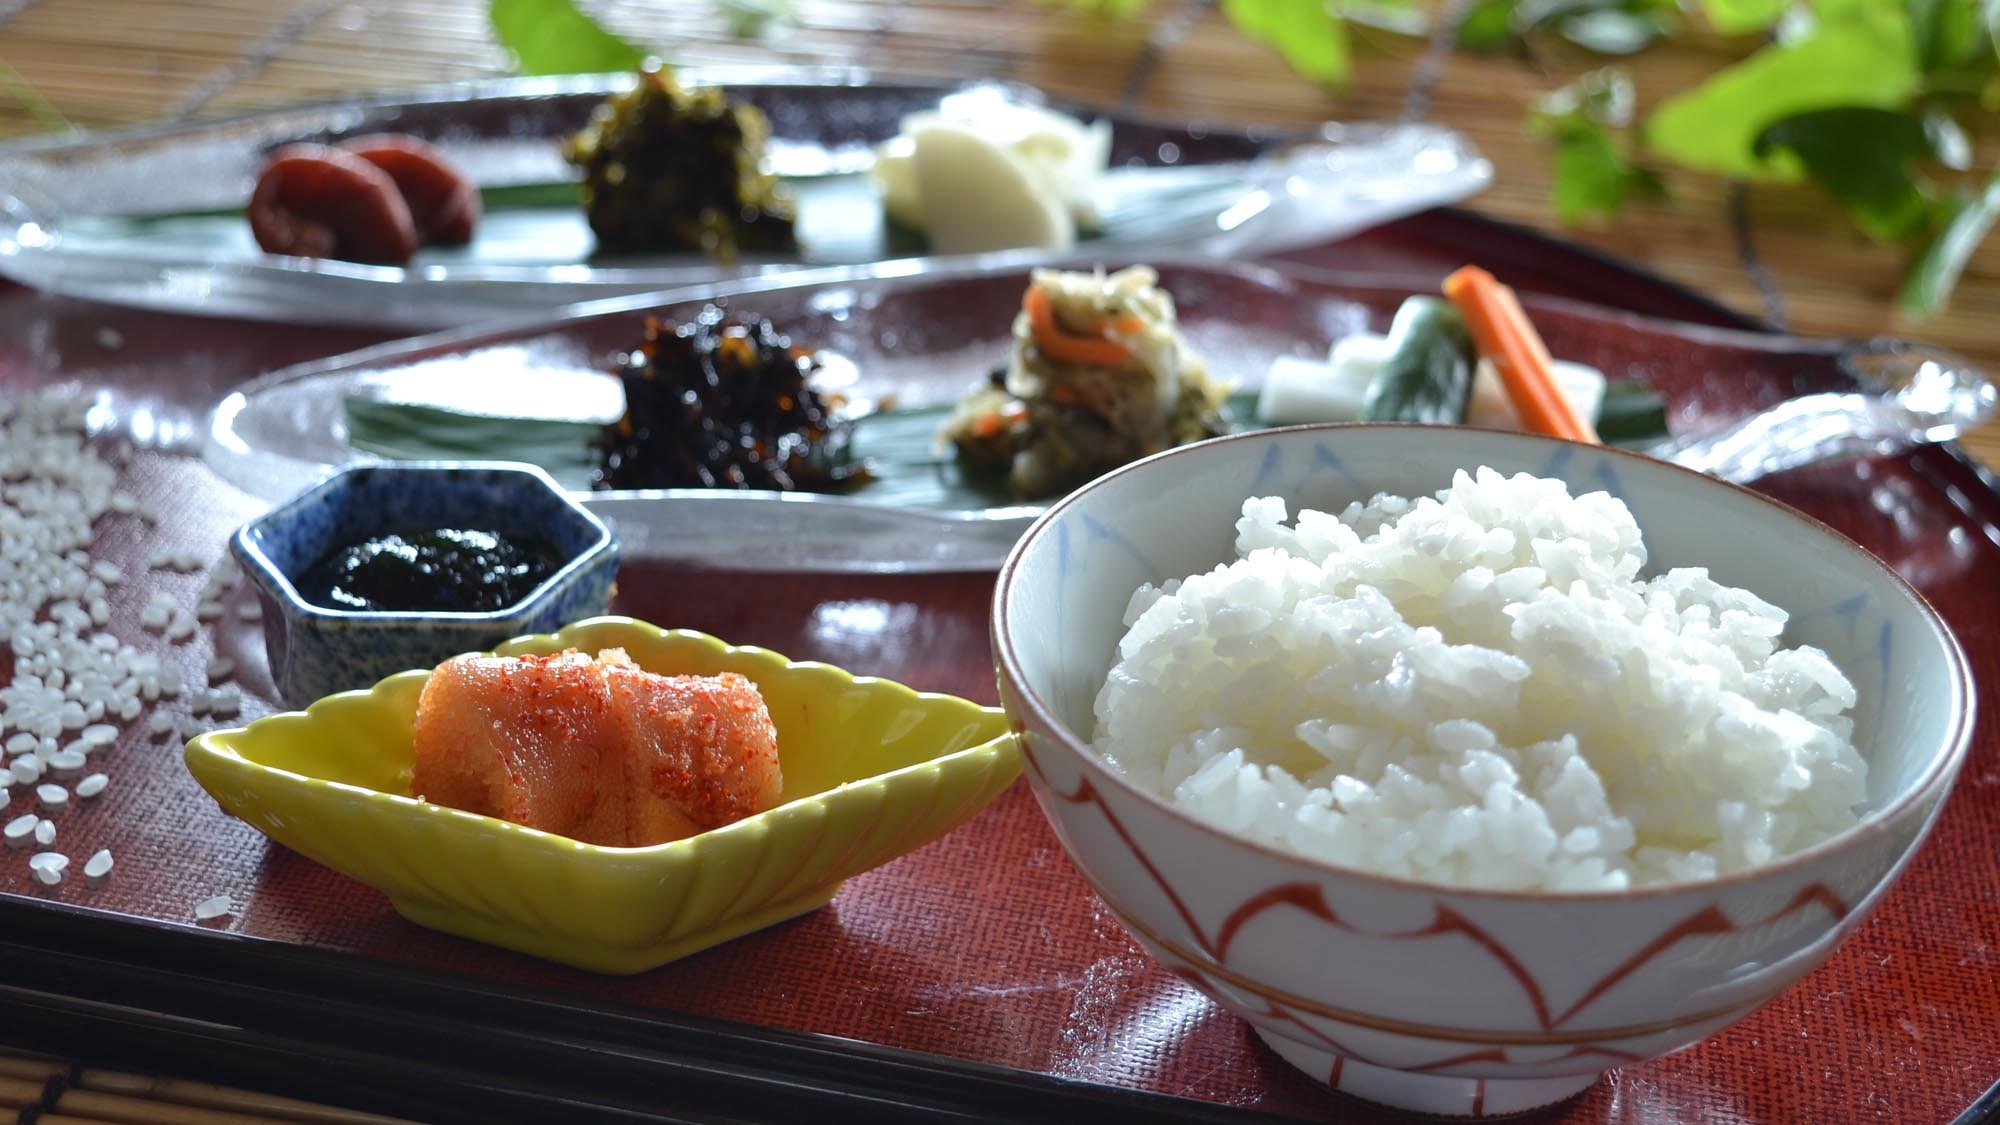 ◆Breakfast white rice (image): Freshly cooked white rice and rice to accompany it.